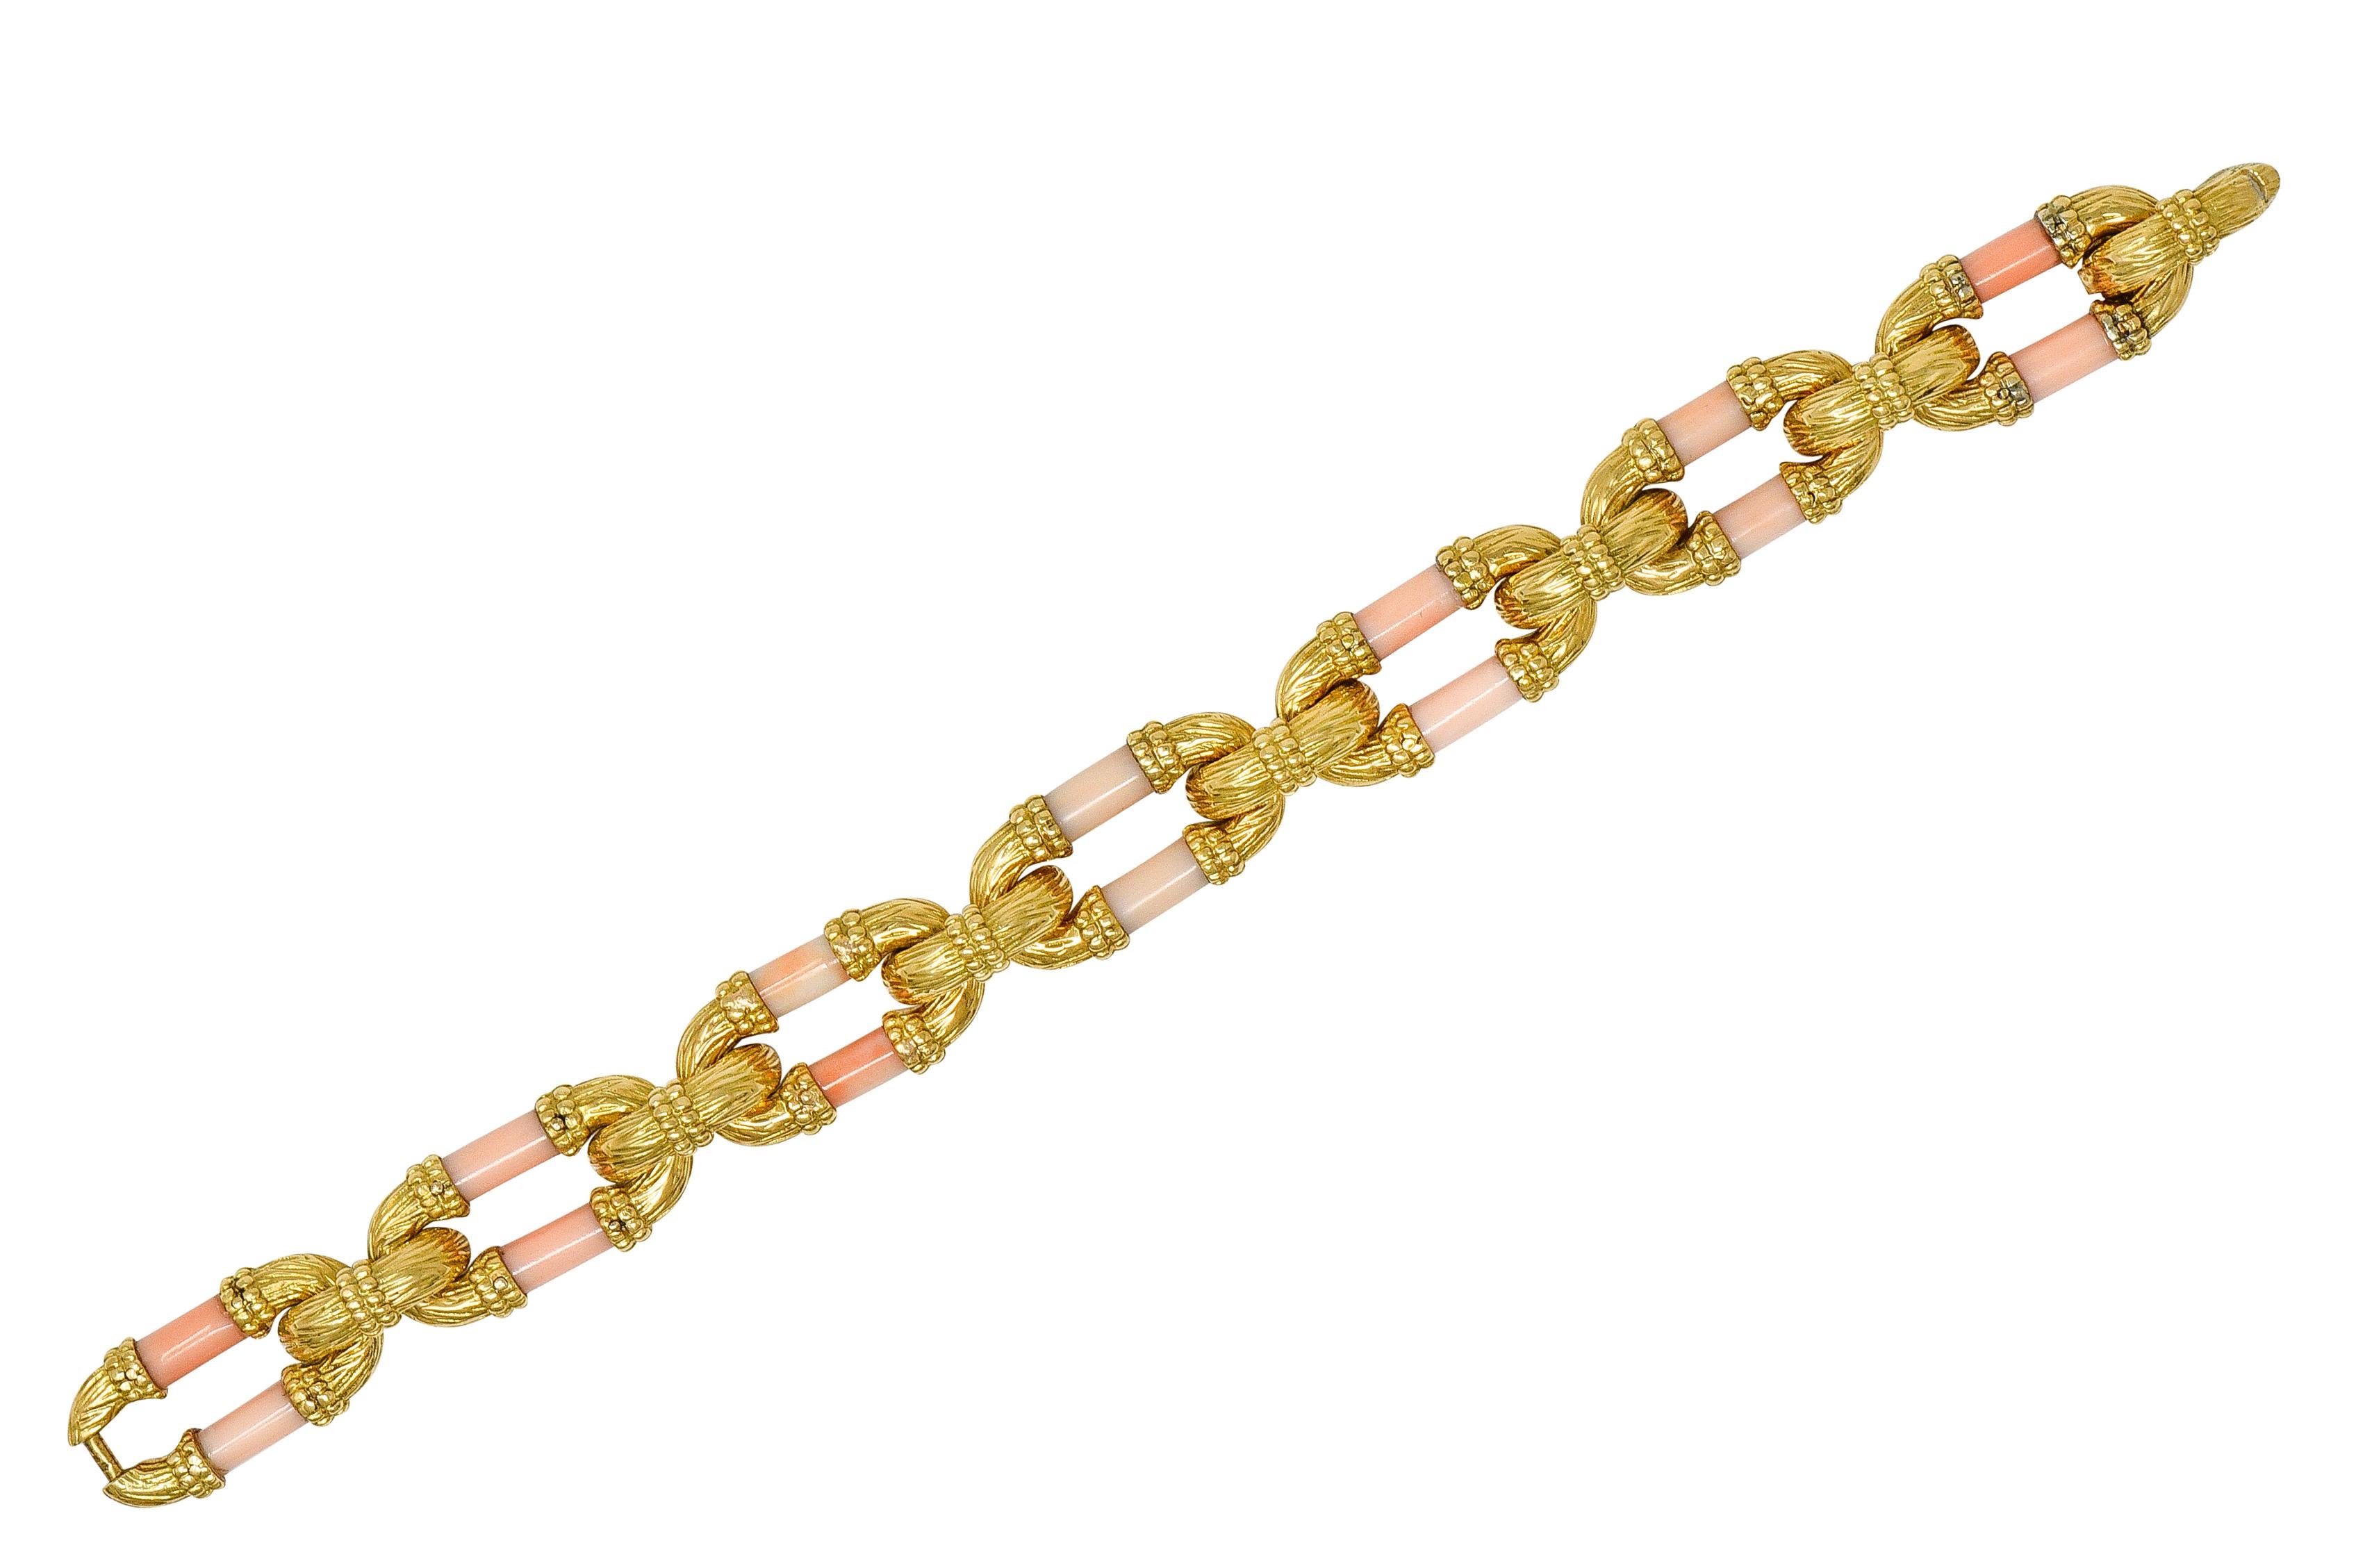 Designed as stylized cable style links with barrel shaped carved coral segments
Measuring 3.5 x 7.0 mm - opaque light pastel pinkish-orange with subtle mottling
With beaded gold detailing and grooved organic texture throughout
Completed by hidden